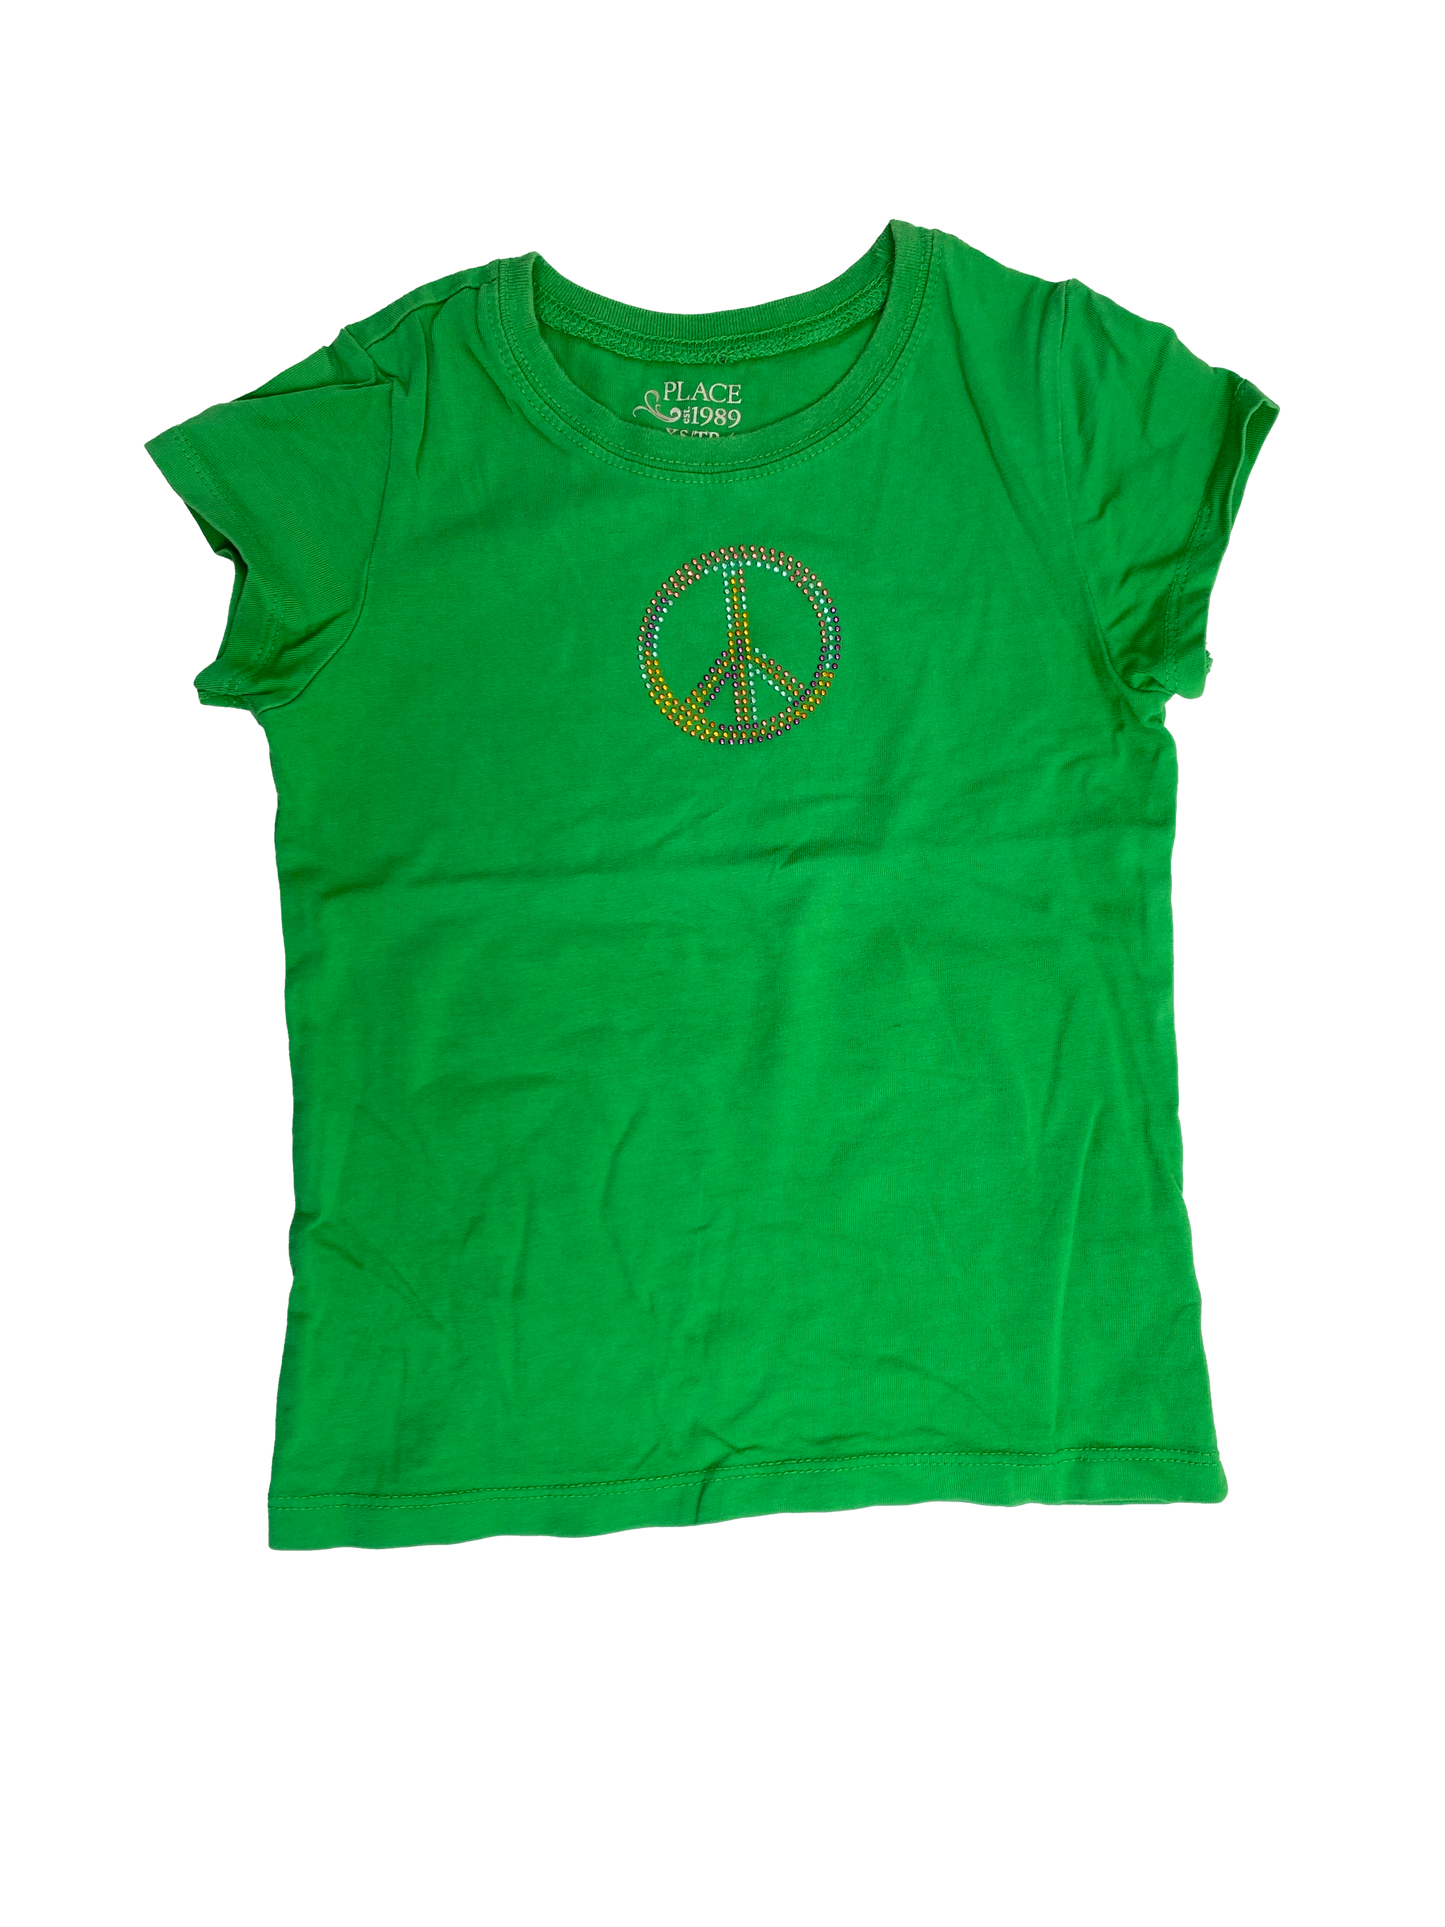 The Children's Place Green T-Shirt with Peace Sign 4-5